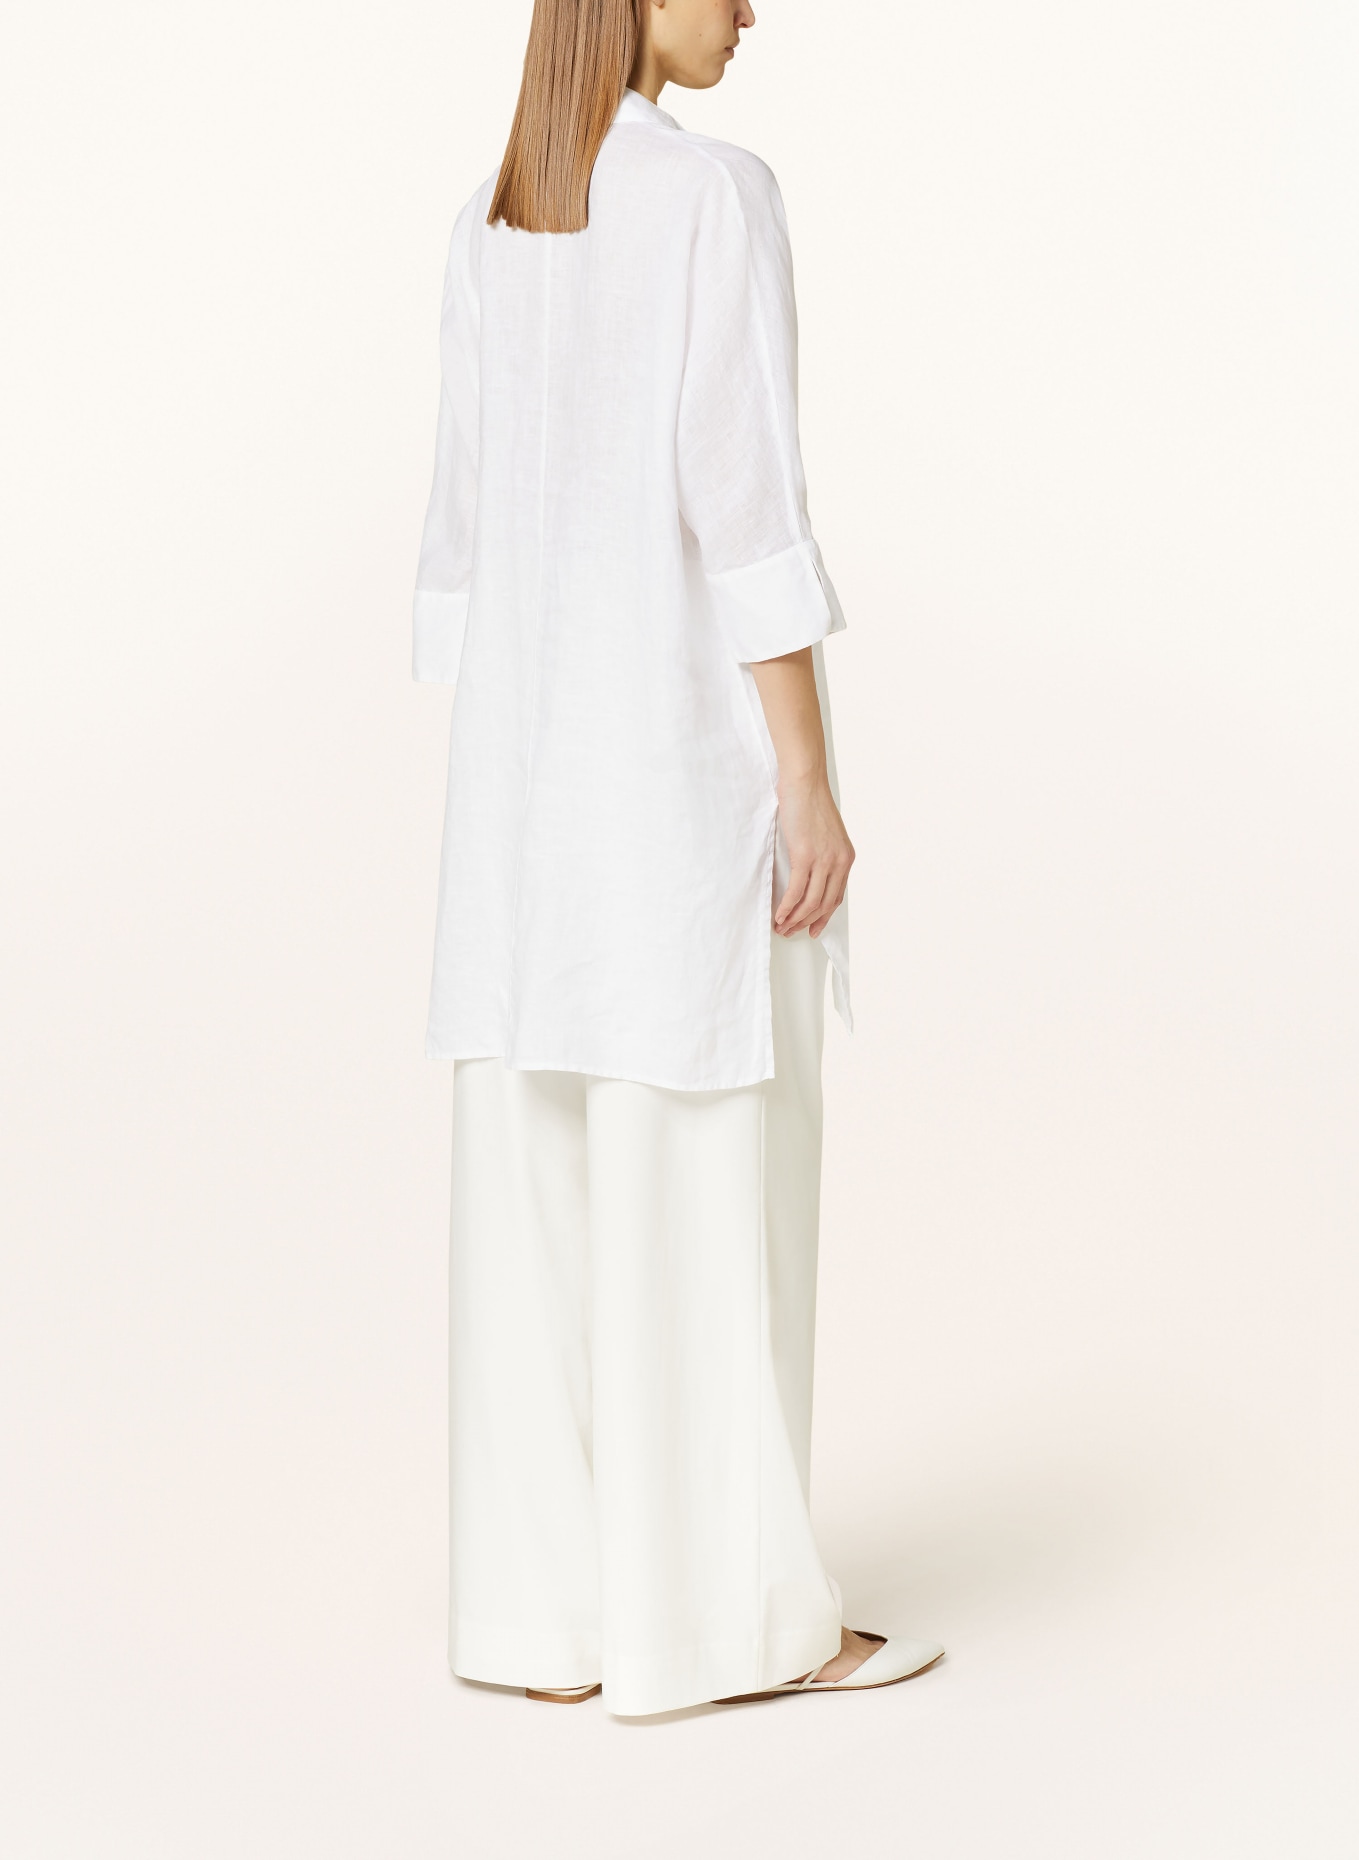 ANTONELLI firenze Shirt blouse ASTI in linen with 3/4 sleeves, Color: WHITE (Image 3)